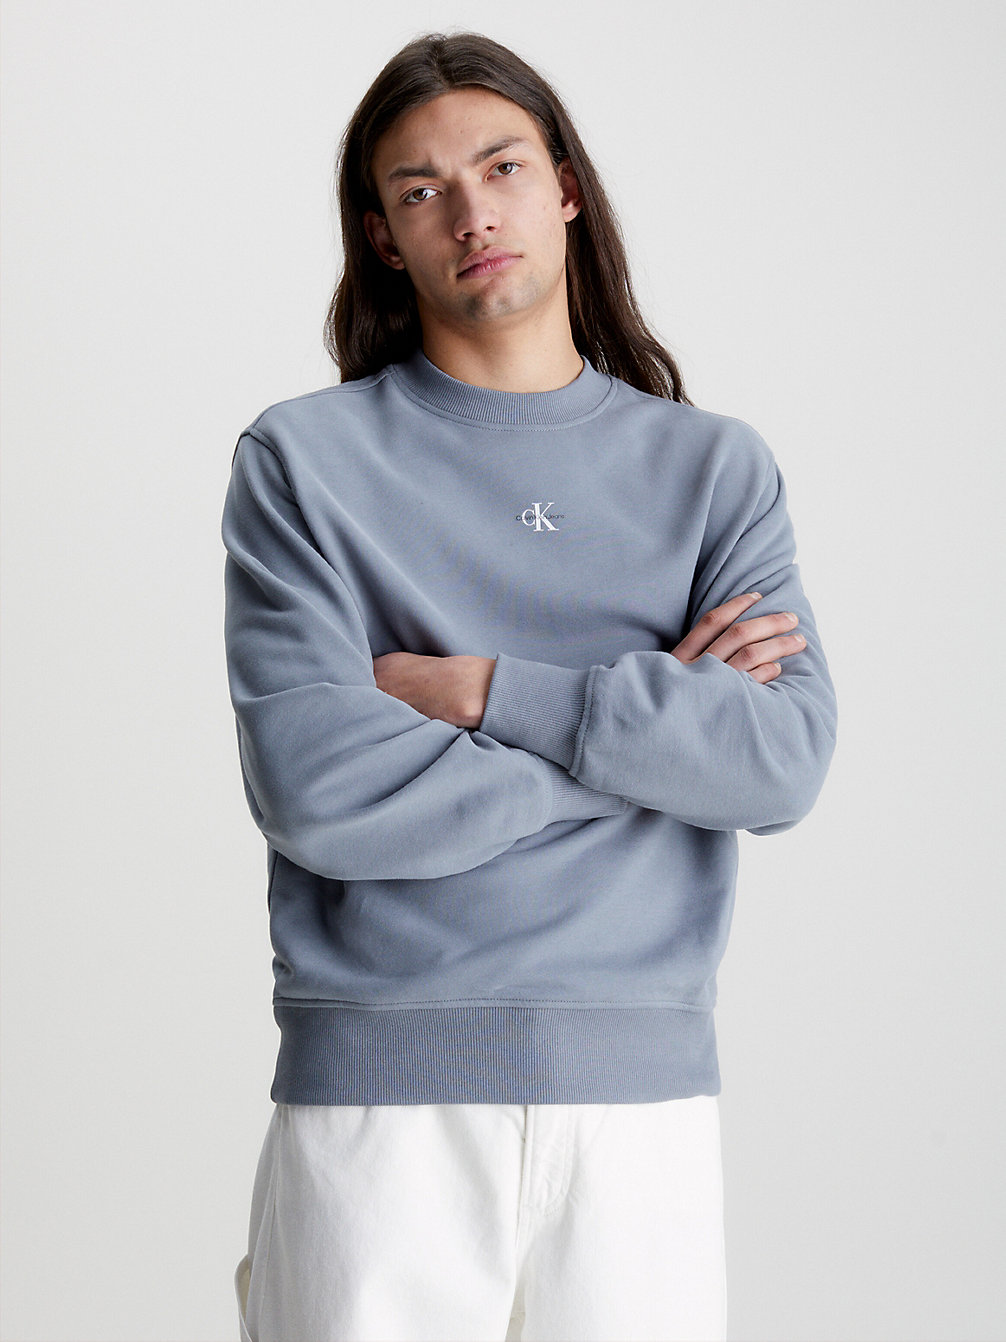 OVERCAST GREY Sweat-Shirt Relaxed Avec Monogramme undefined hommes Calvin Klein